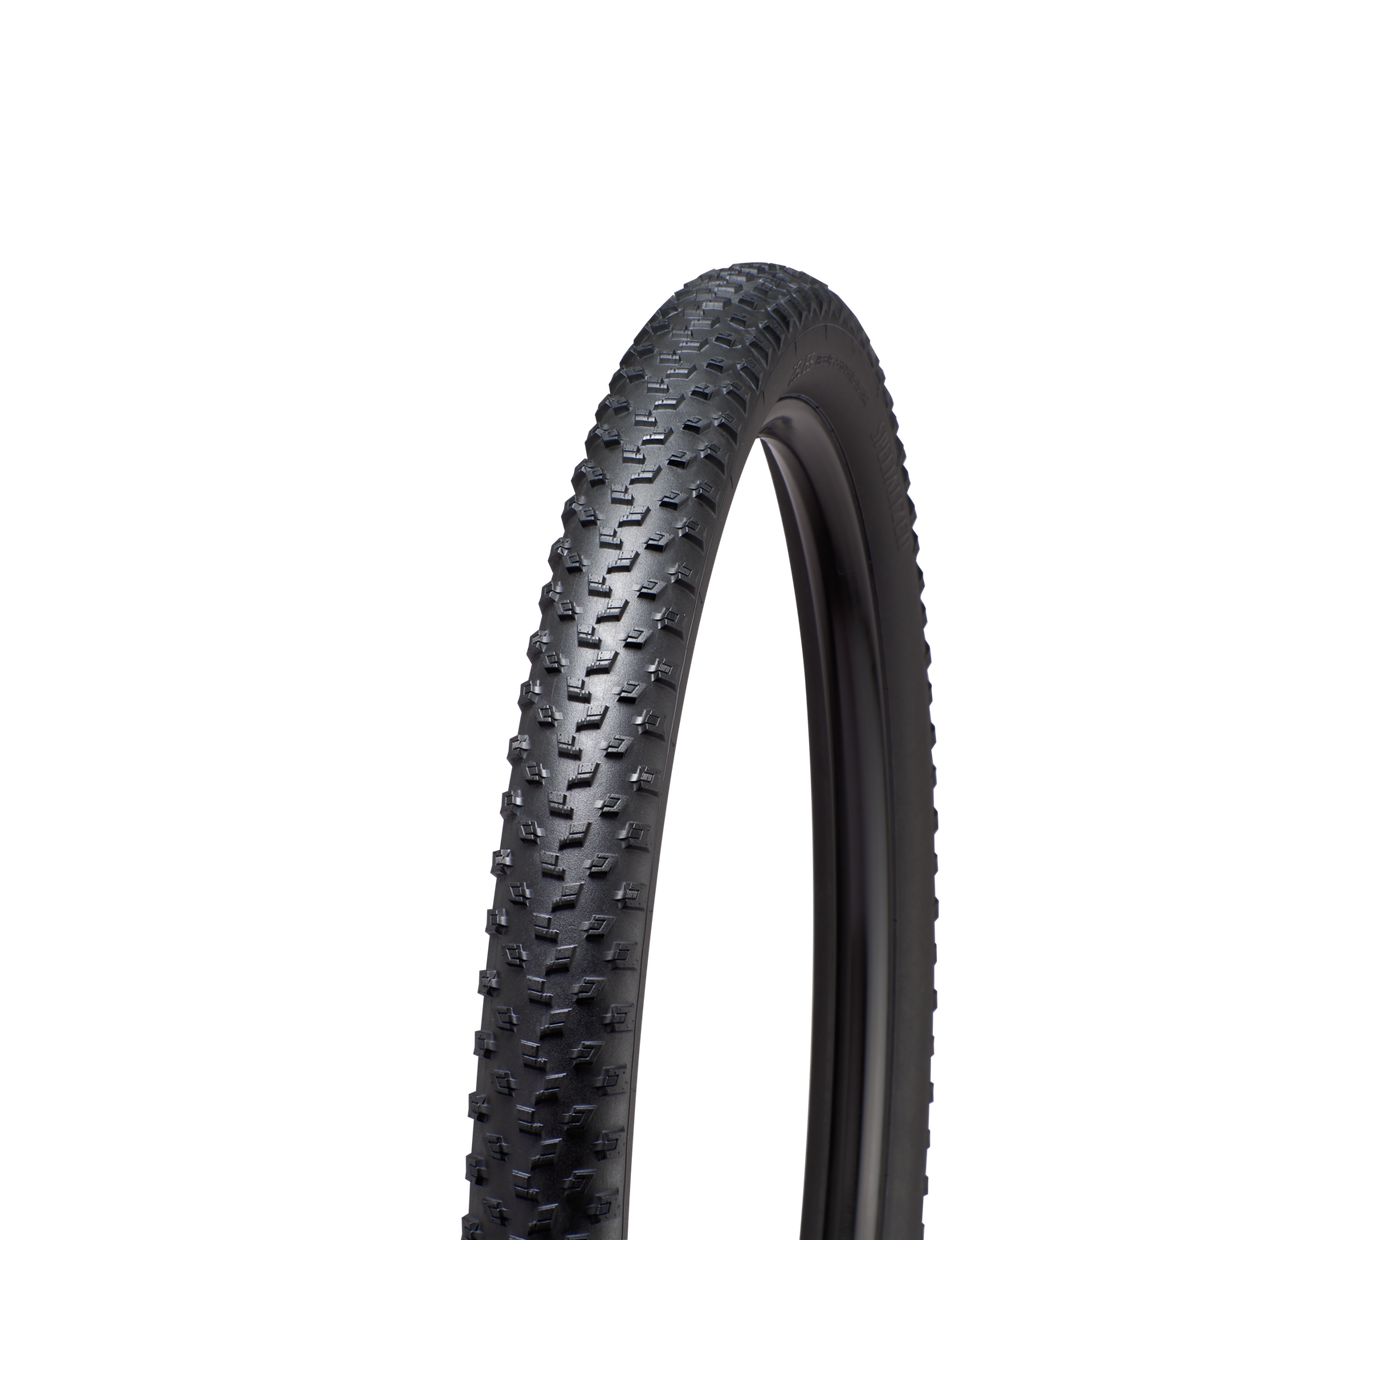 Specialized Fast Trak GRID 2Bliss Ready T7 29" Tubeless Bike Tire - Tires - Bicycle Warehouse